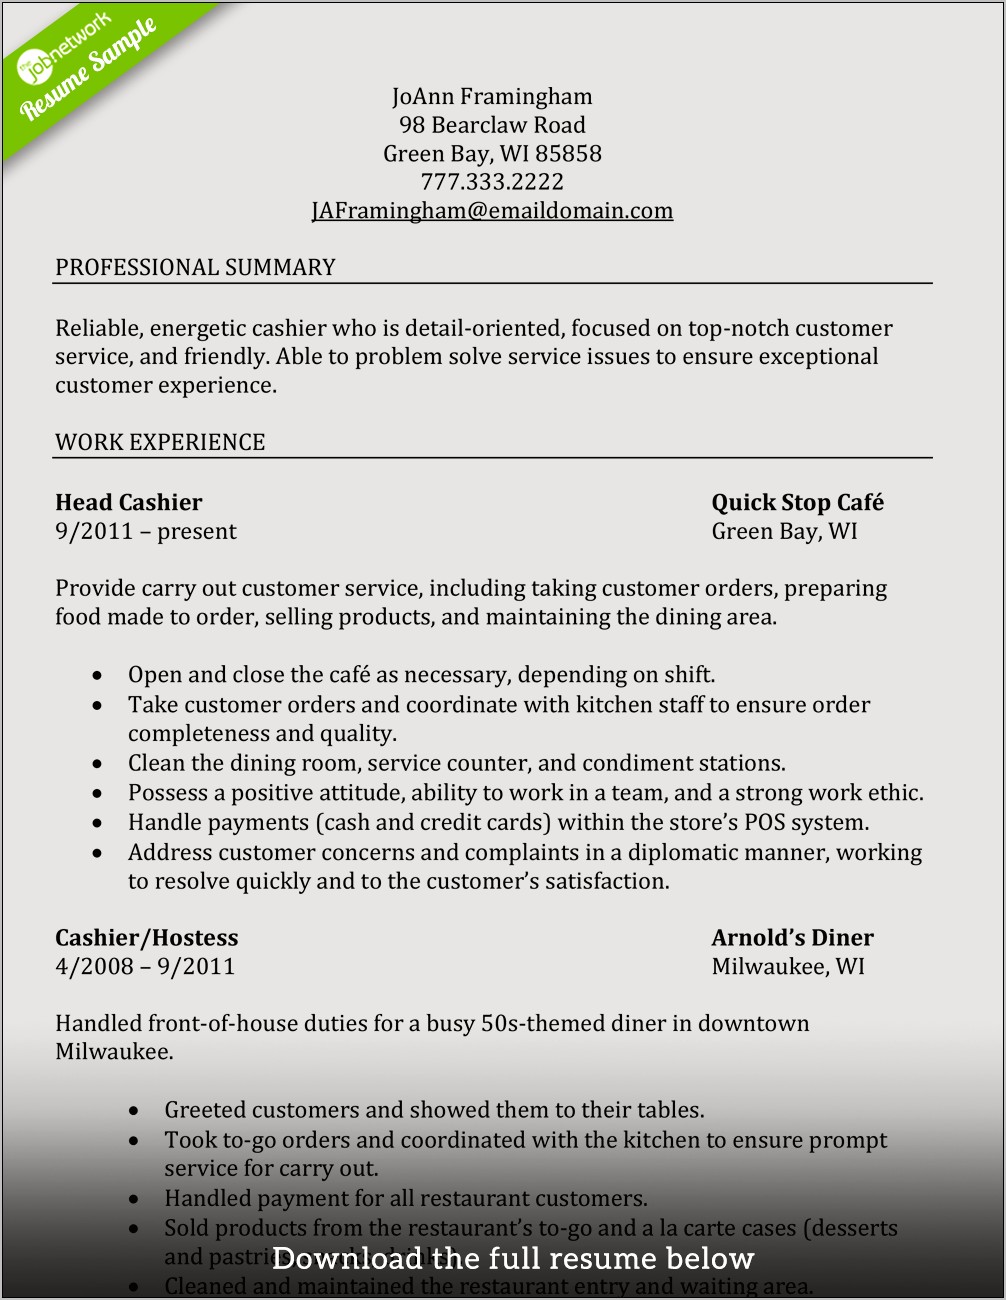 Quote To Cash Entries On Resumes Examples